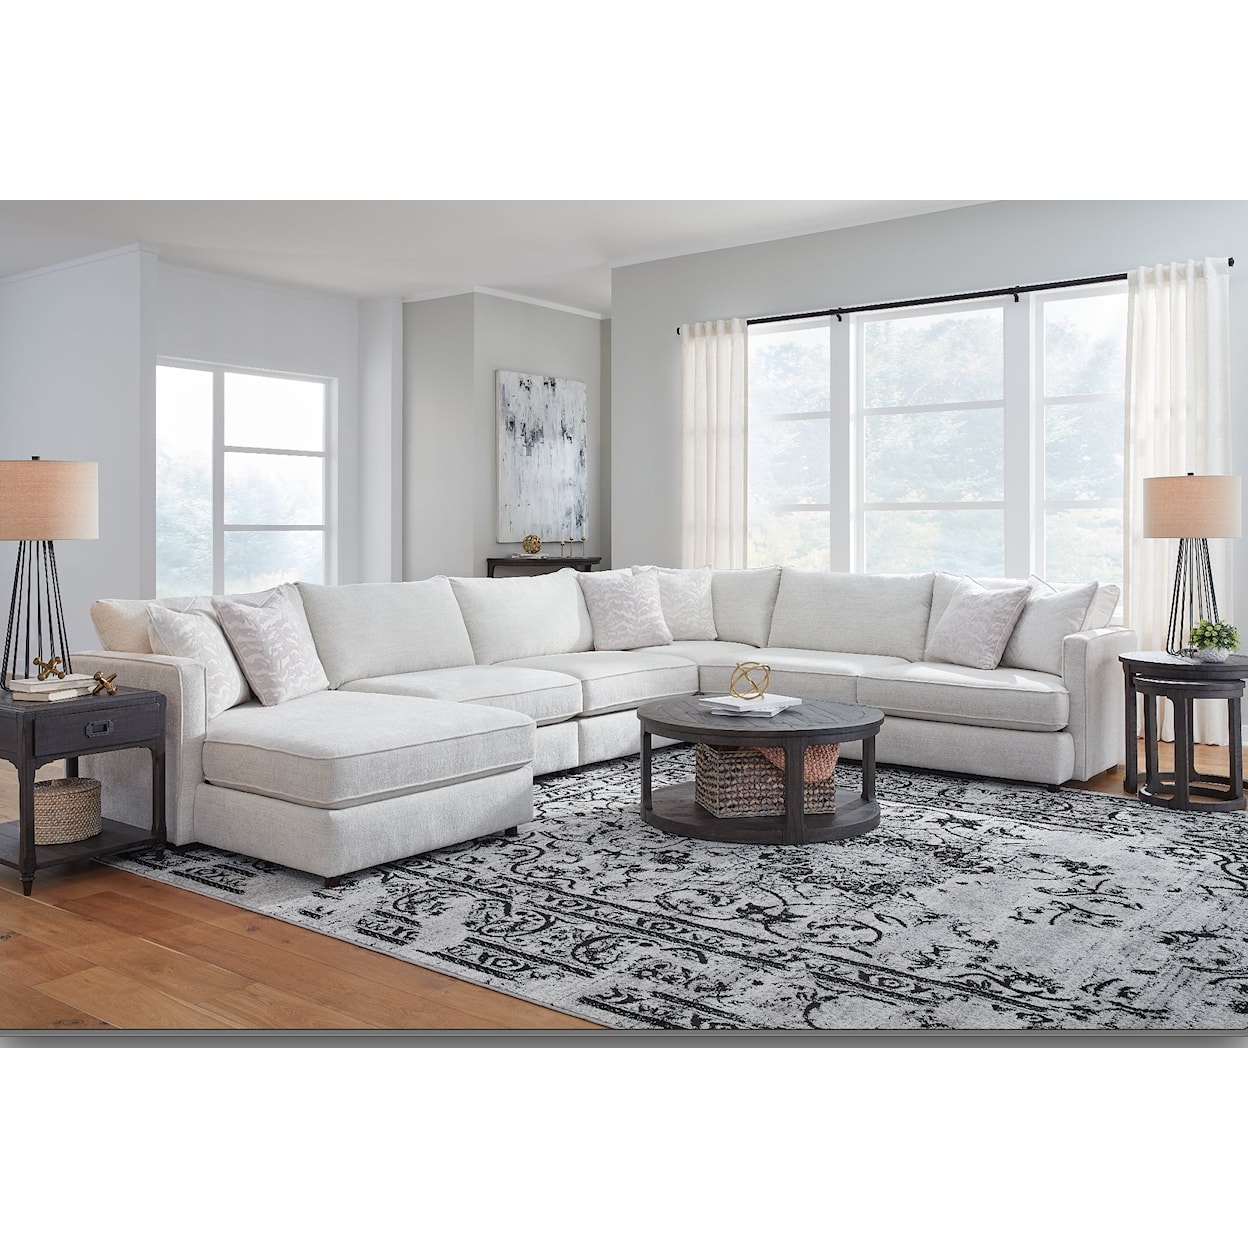 The Mix Finley 5-Seat Sectional Sofa